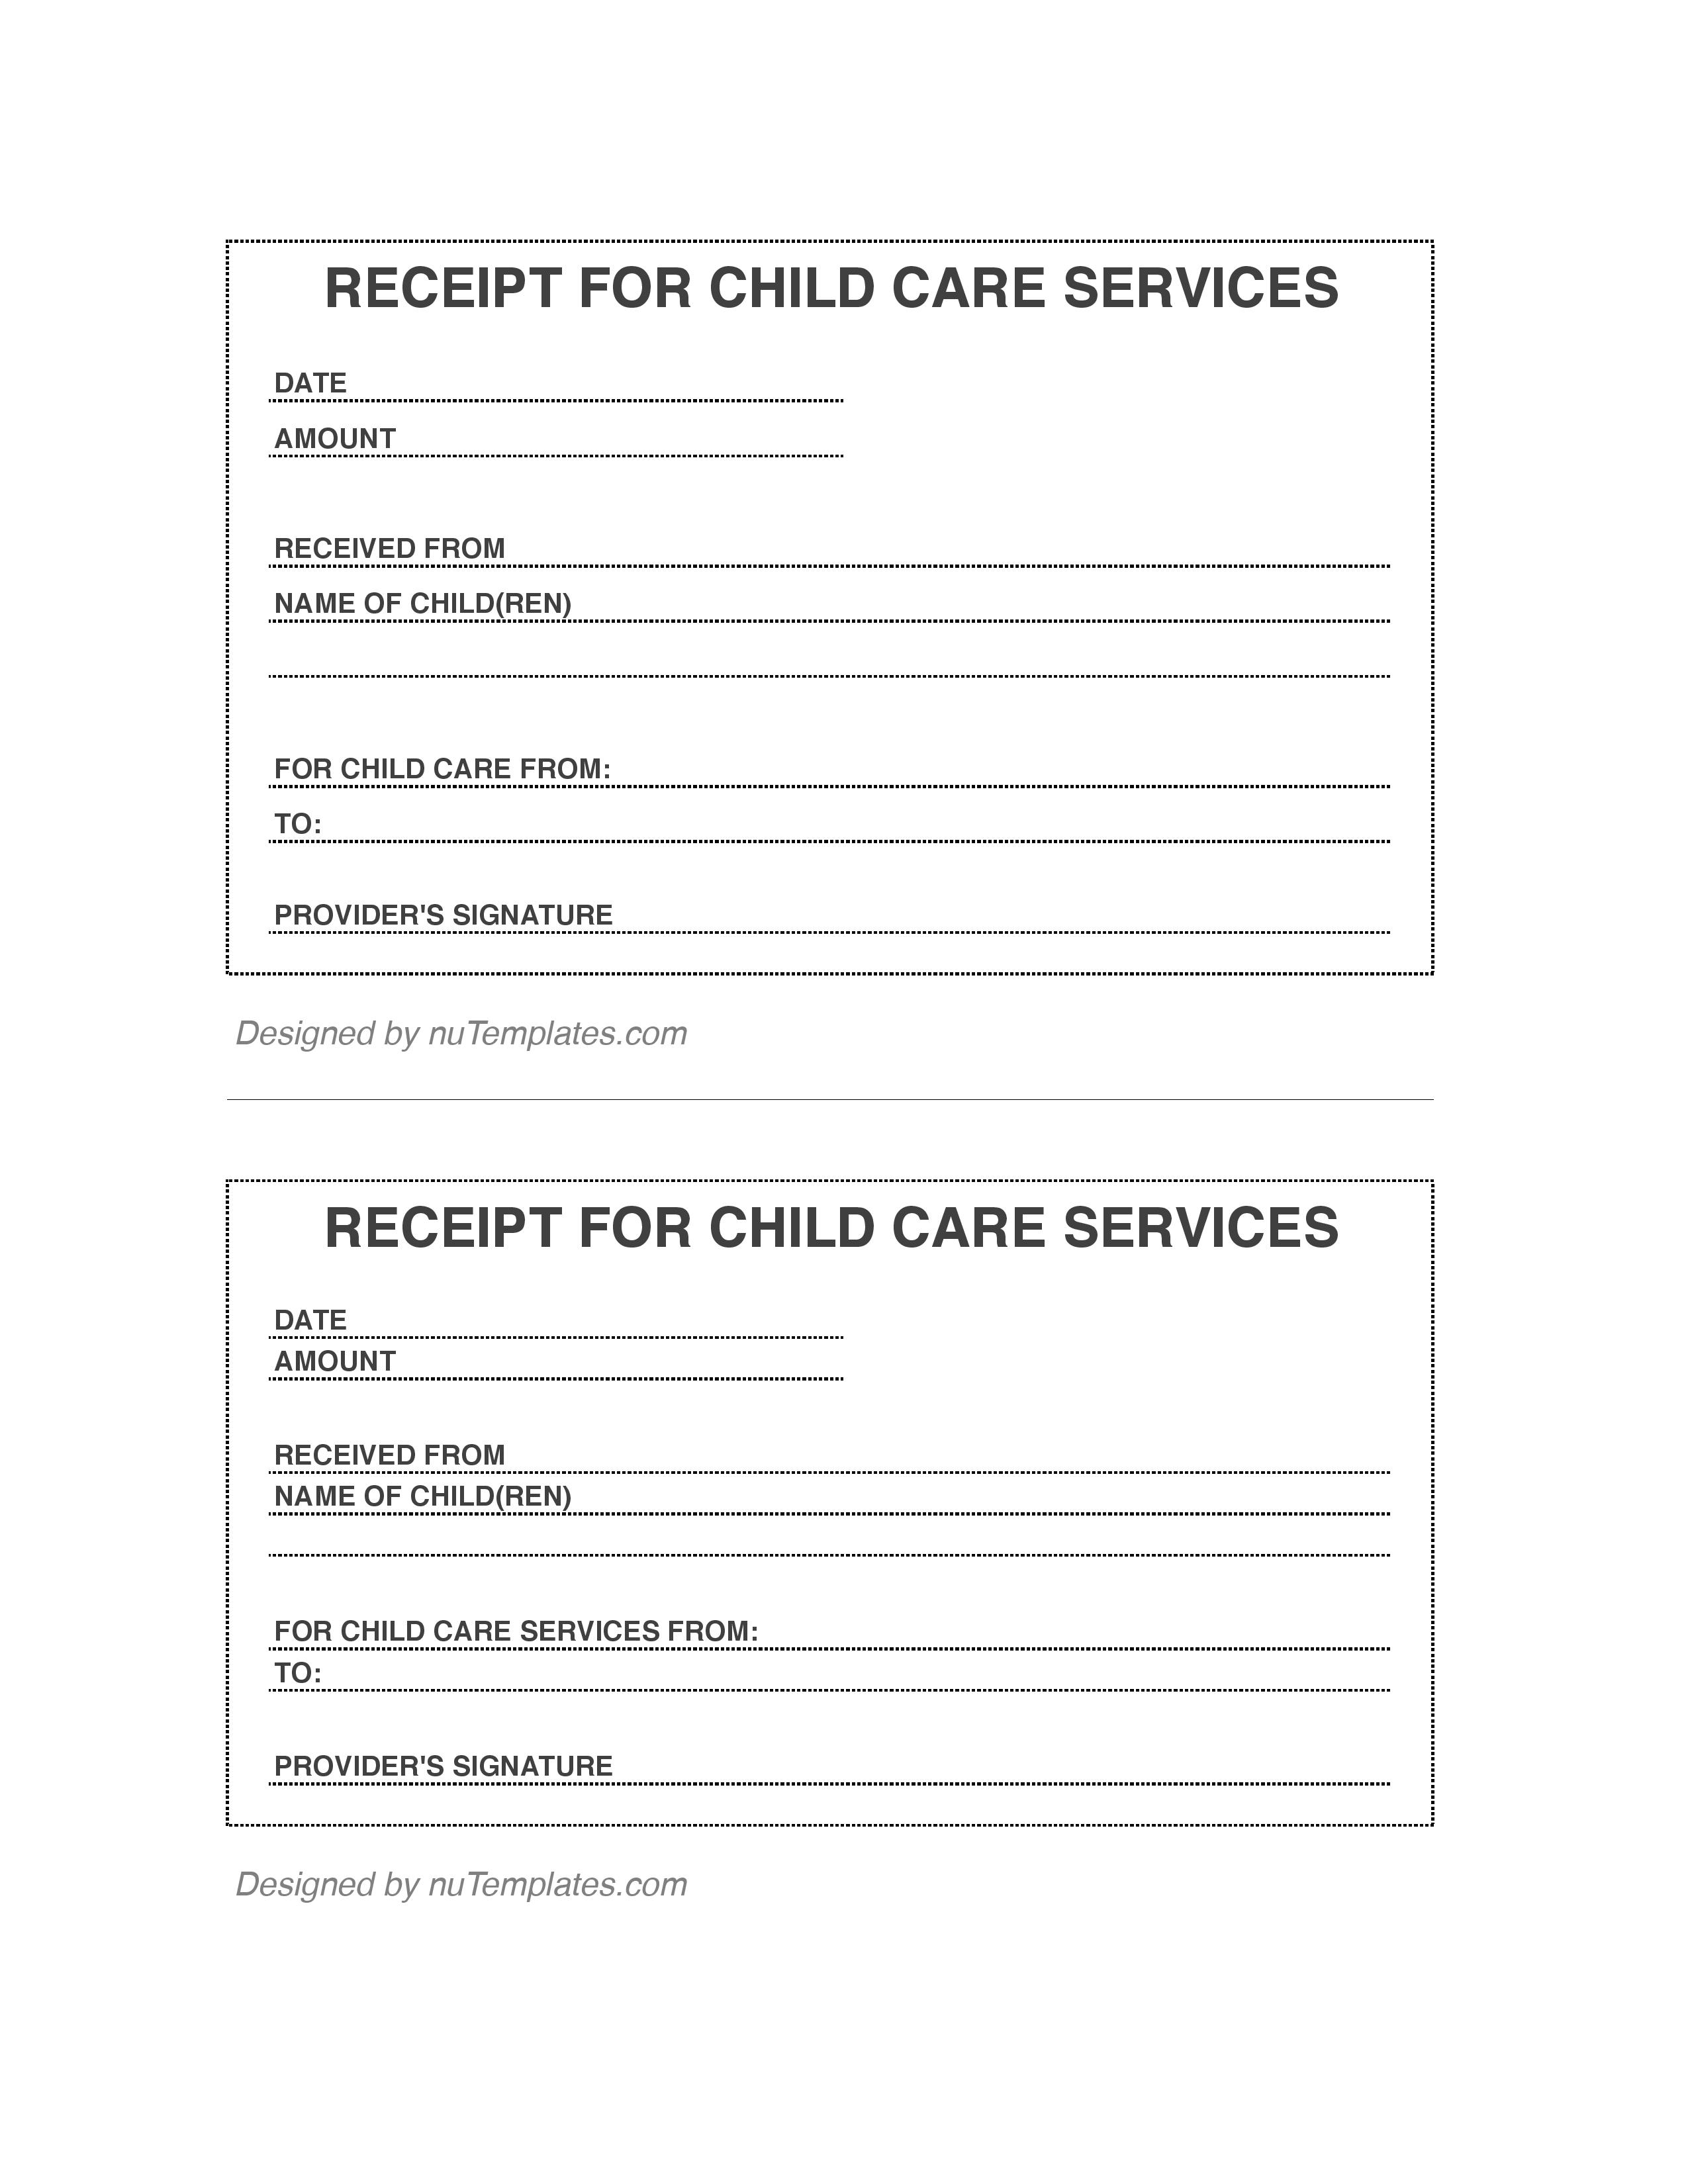 Daycare Receipt Template Daycare Receipts nuTemplates